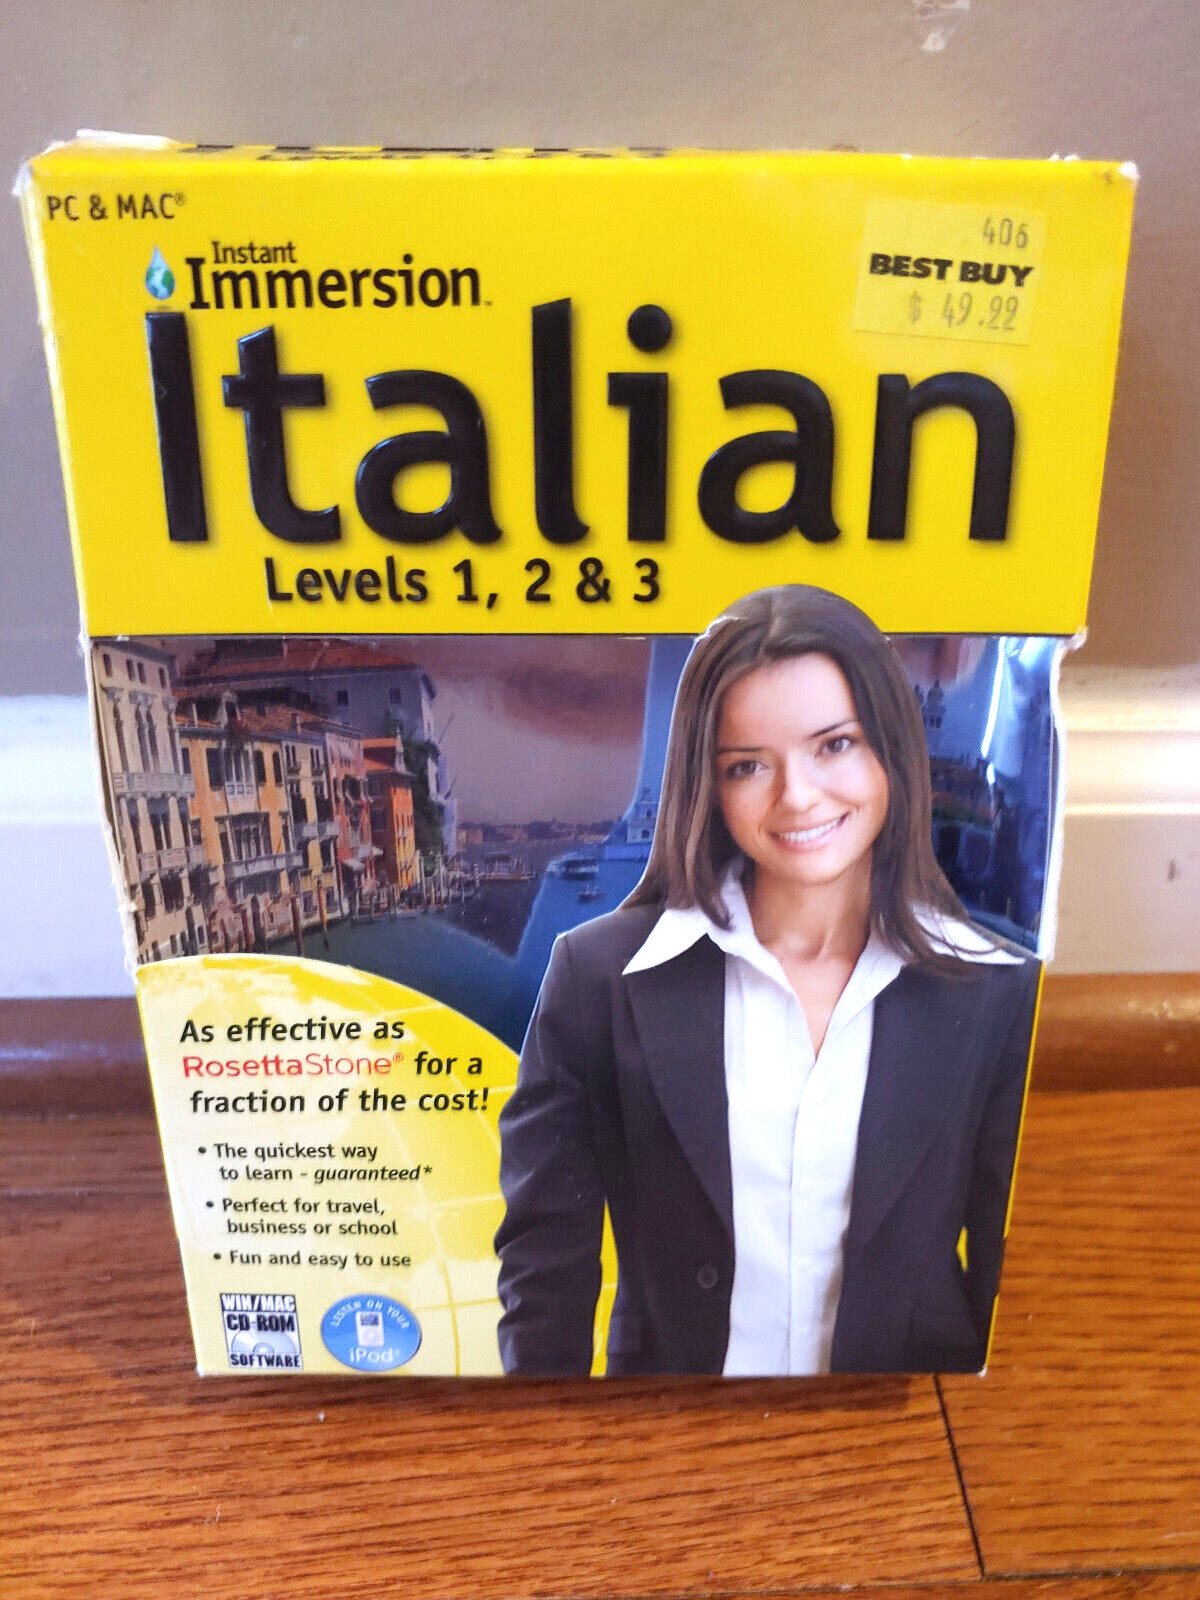 Learn How To Speak Italian With Instant Immersion Levels 1-3 PC/MAC